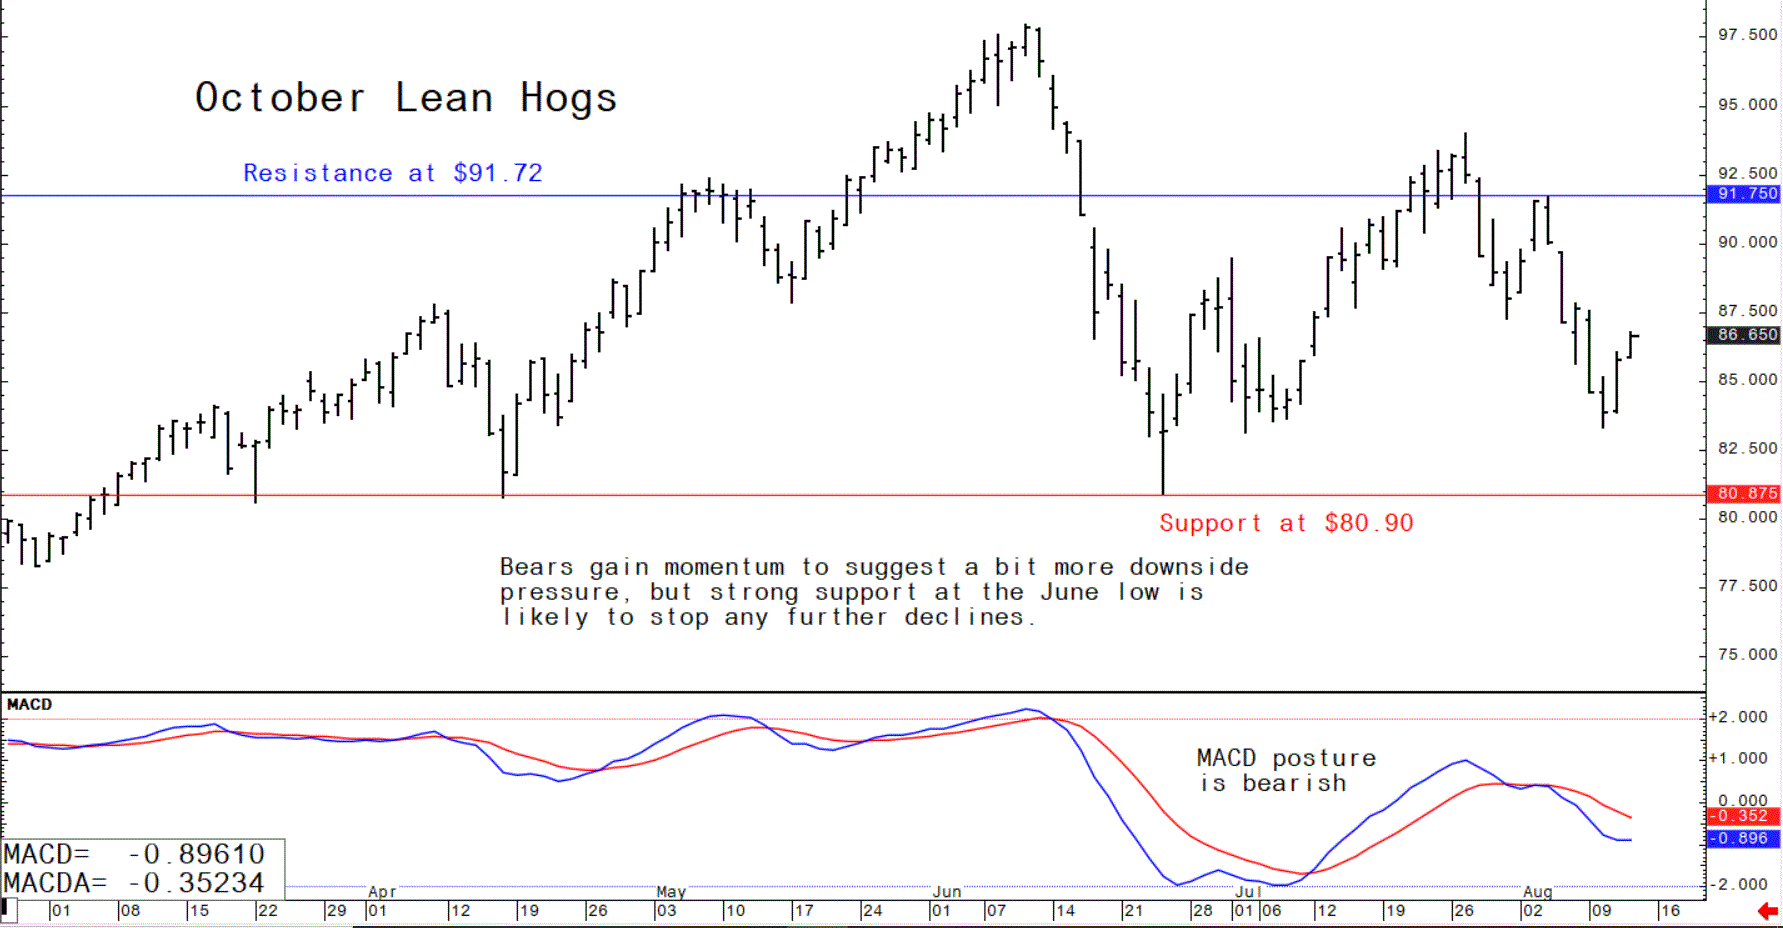 Graph showing the trading trajectory of October lean hog futures